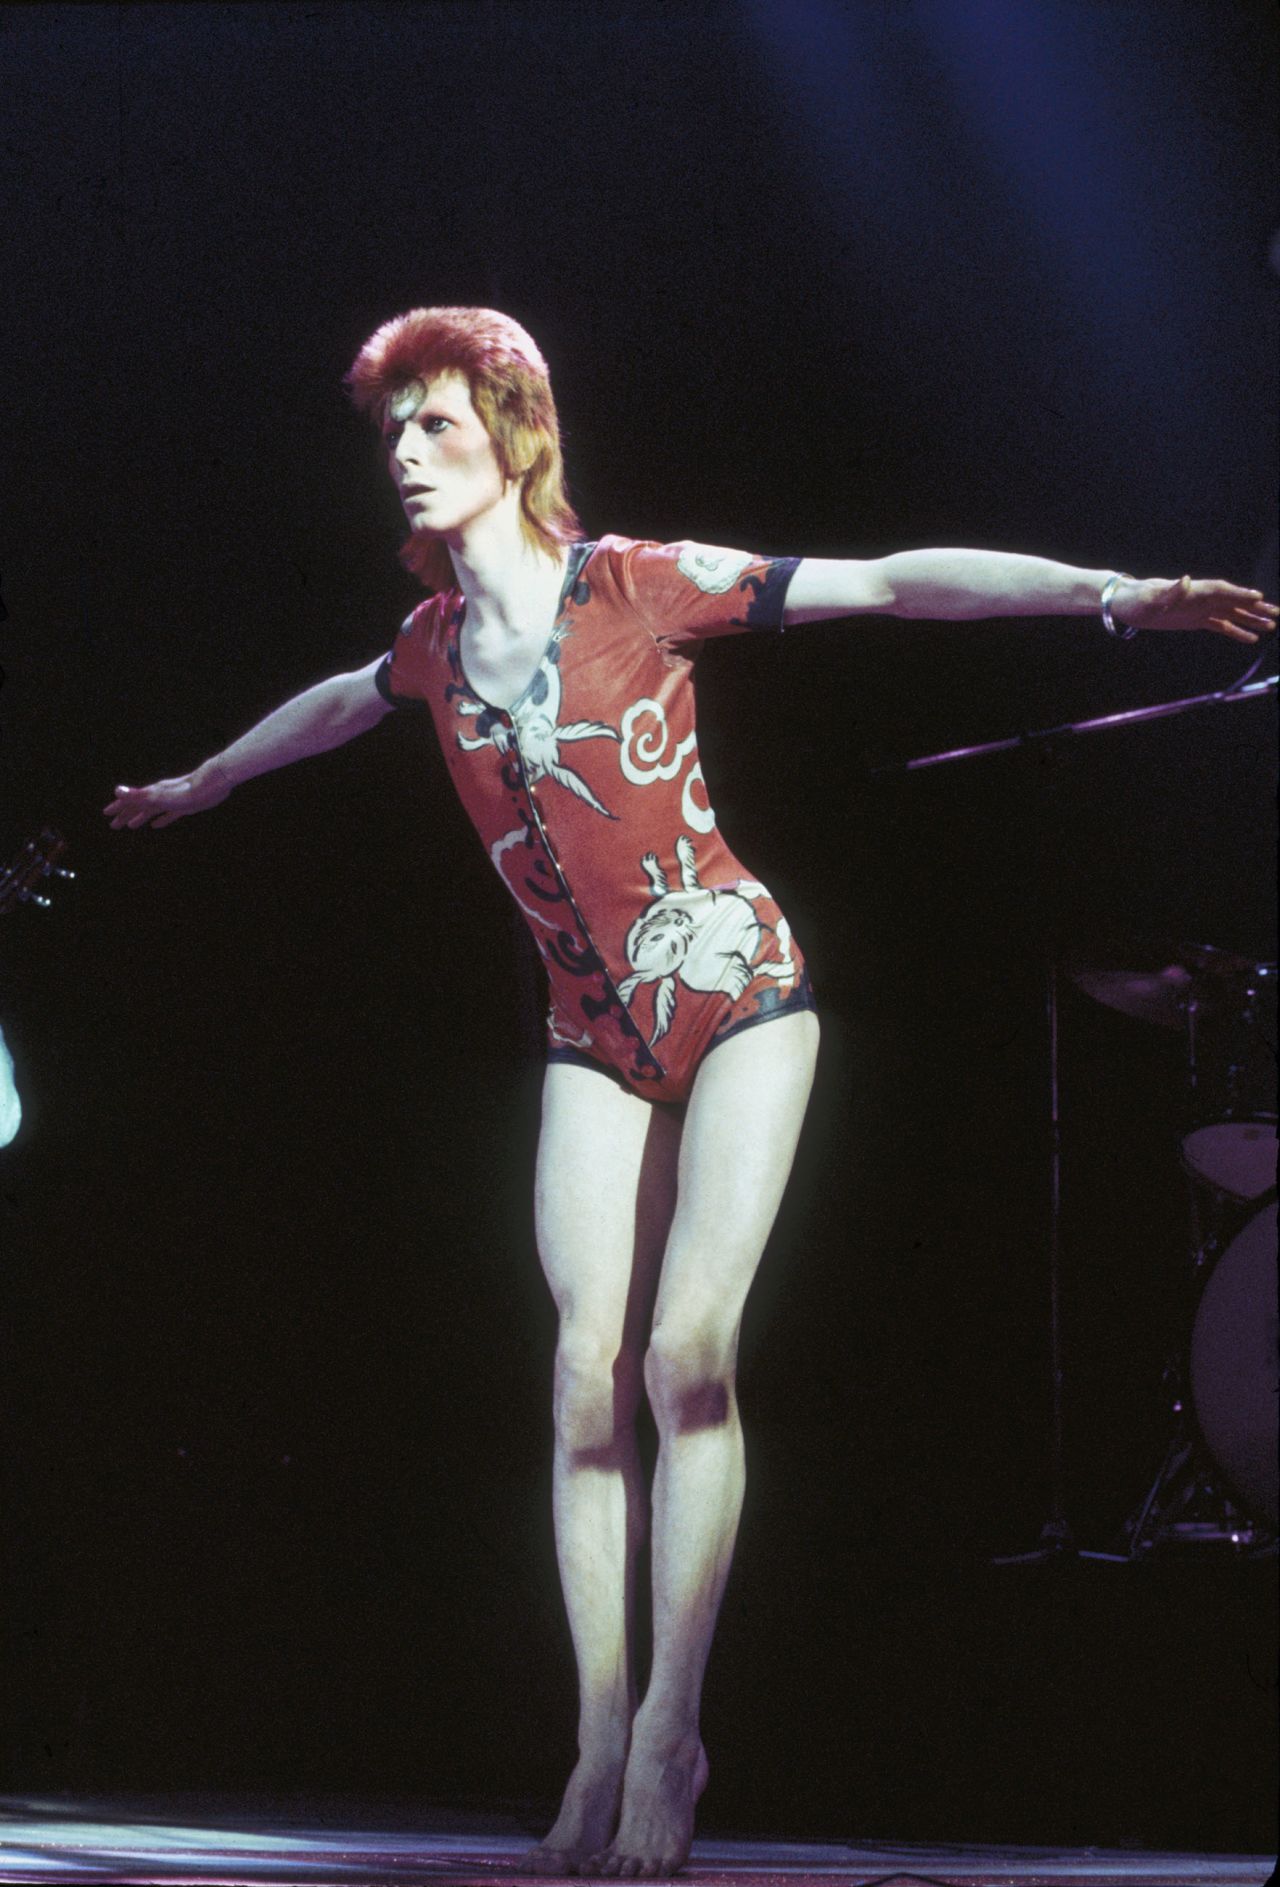 David Bowie performing as Ziggy Stardust, in his "woodland creatures" costume designed by Kansai Yamamoto, at the Hammersmith Odeon, 1973. 